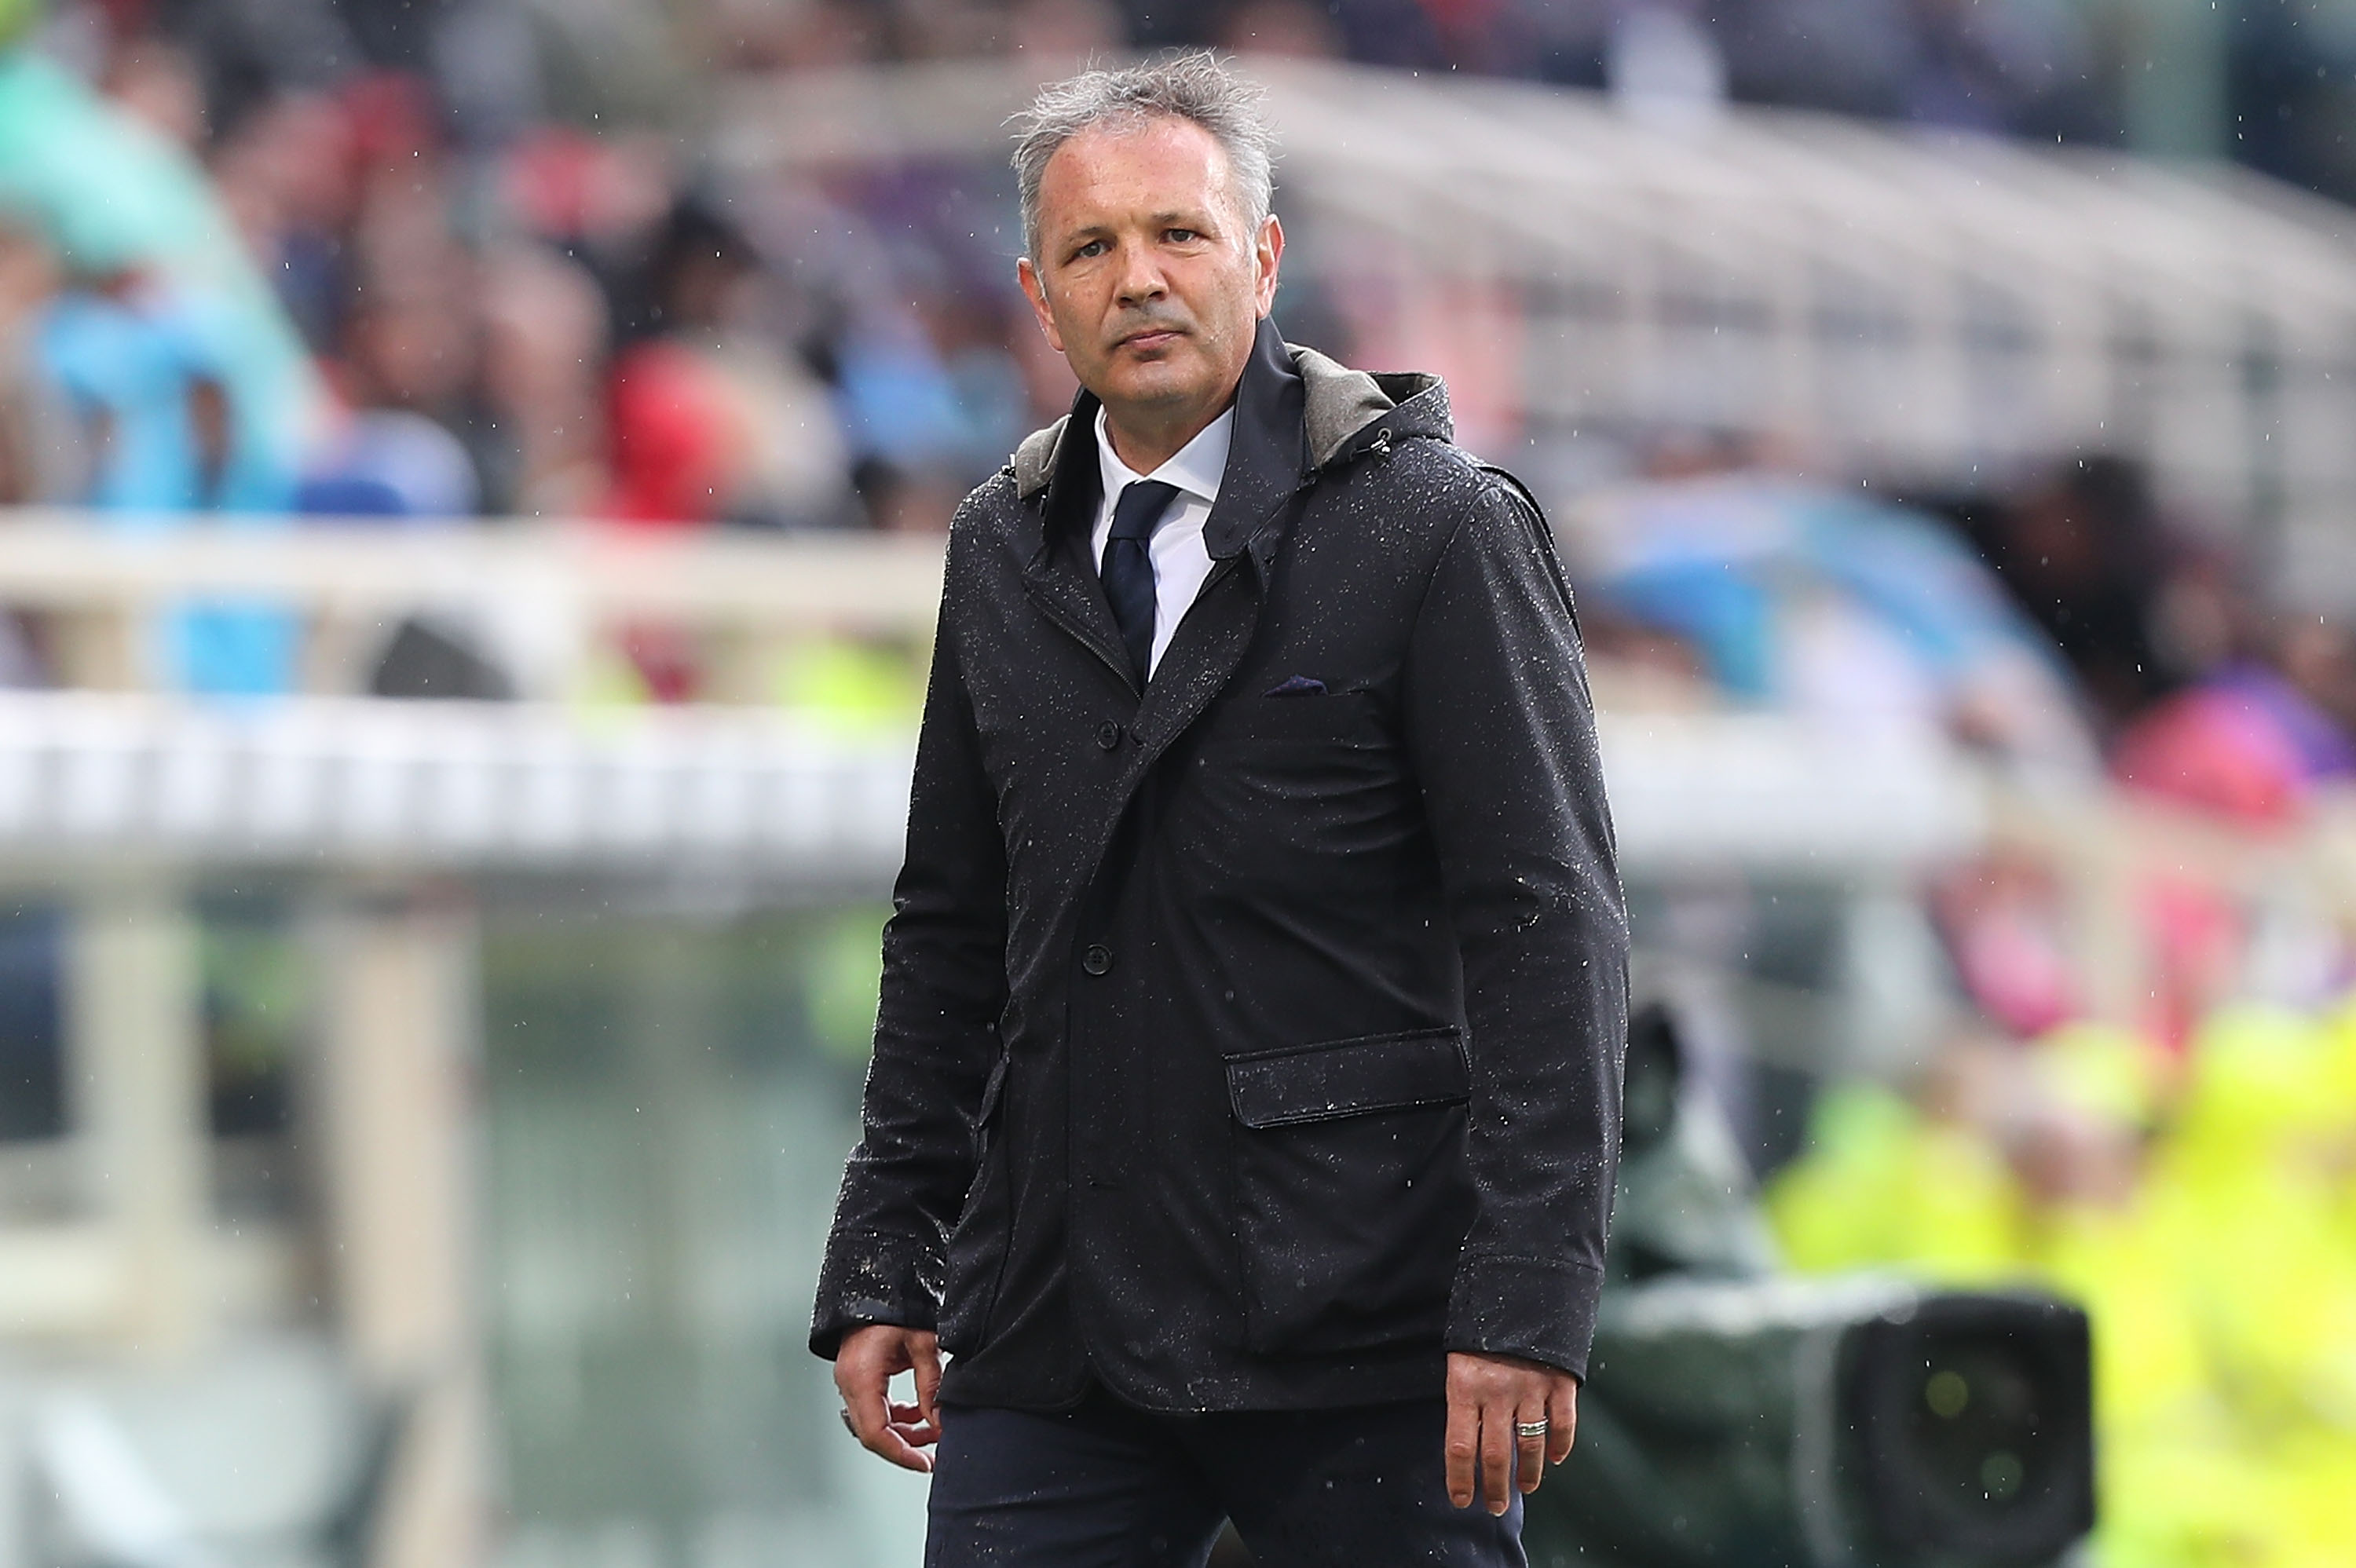 FLORENCE, ITALY - APRIL 14: Sinisa Mihajlovic manager of Bologna FC looks on during the Serie A match between ACF Fiorentina and Bologna FC at Stadio Artemio Franchi on April 14, 2019 in Florence, Italy.  (Photo by Gabriele Maltinti/Getty Images)